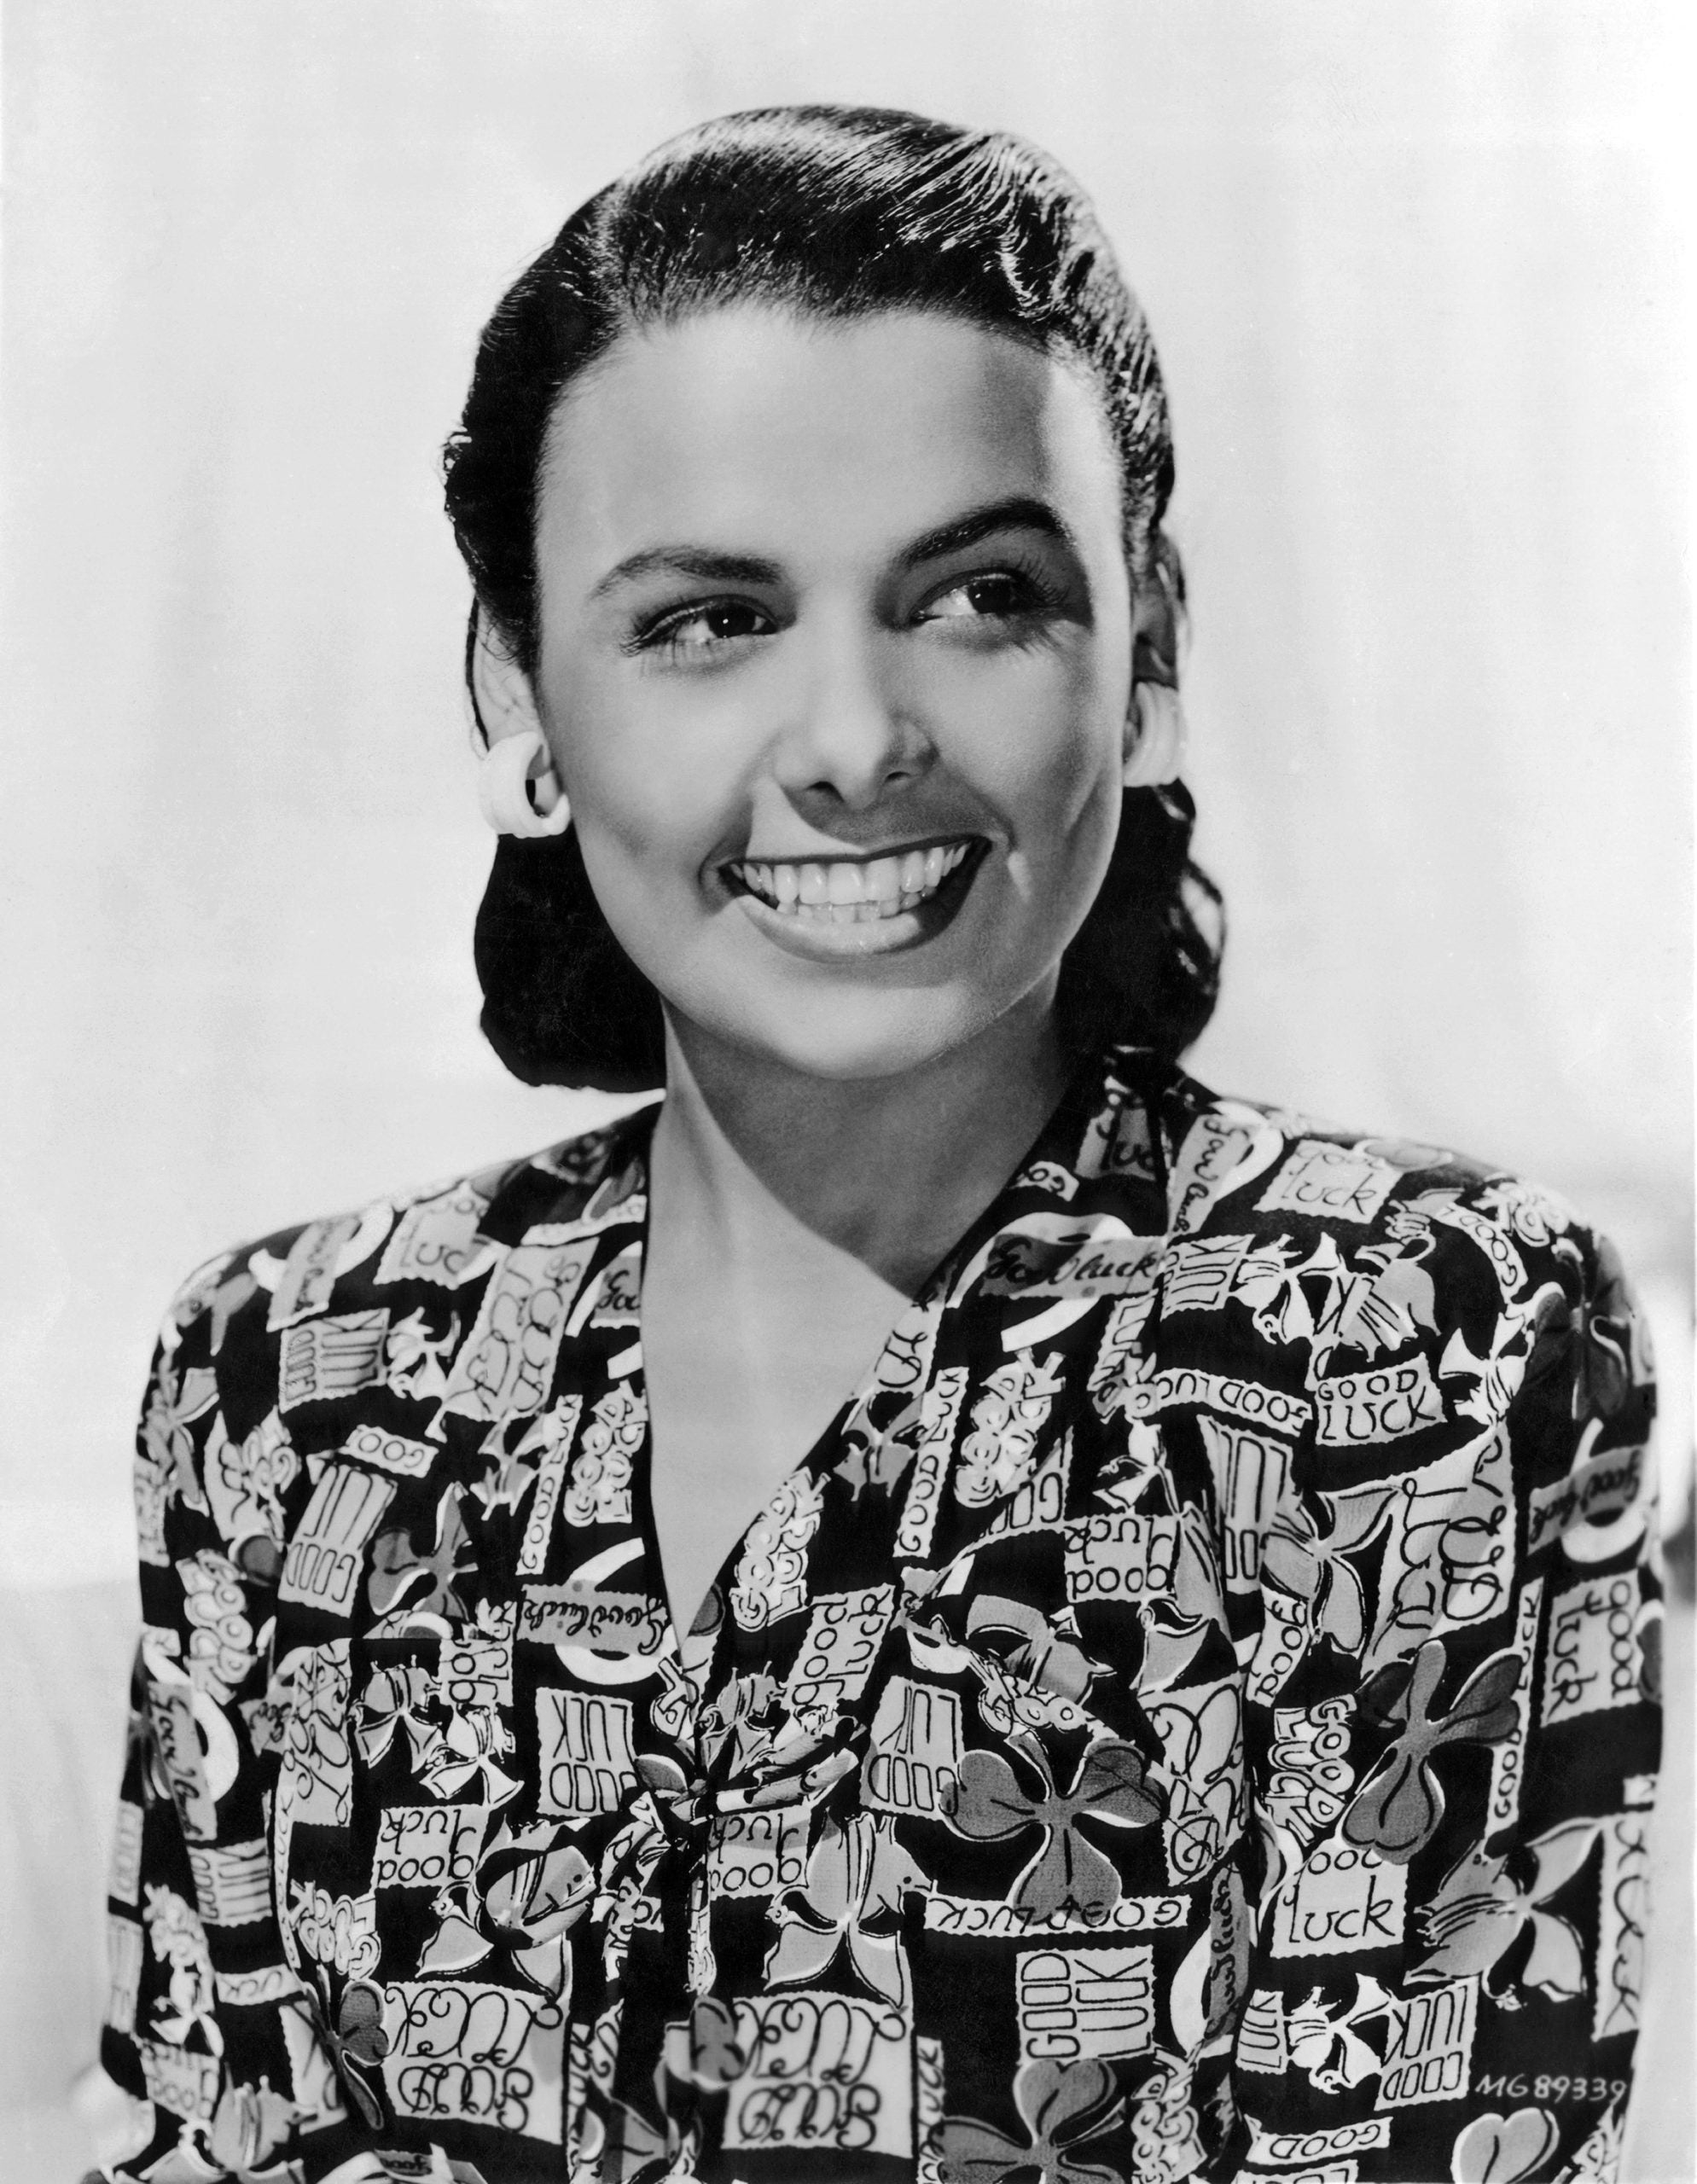 A Broadway theater was renamed in honor of Lena Horne